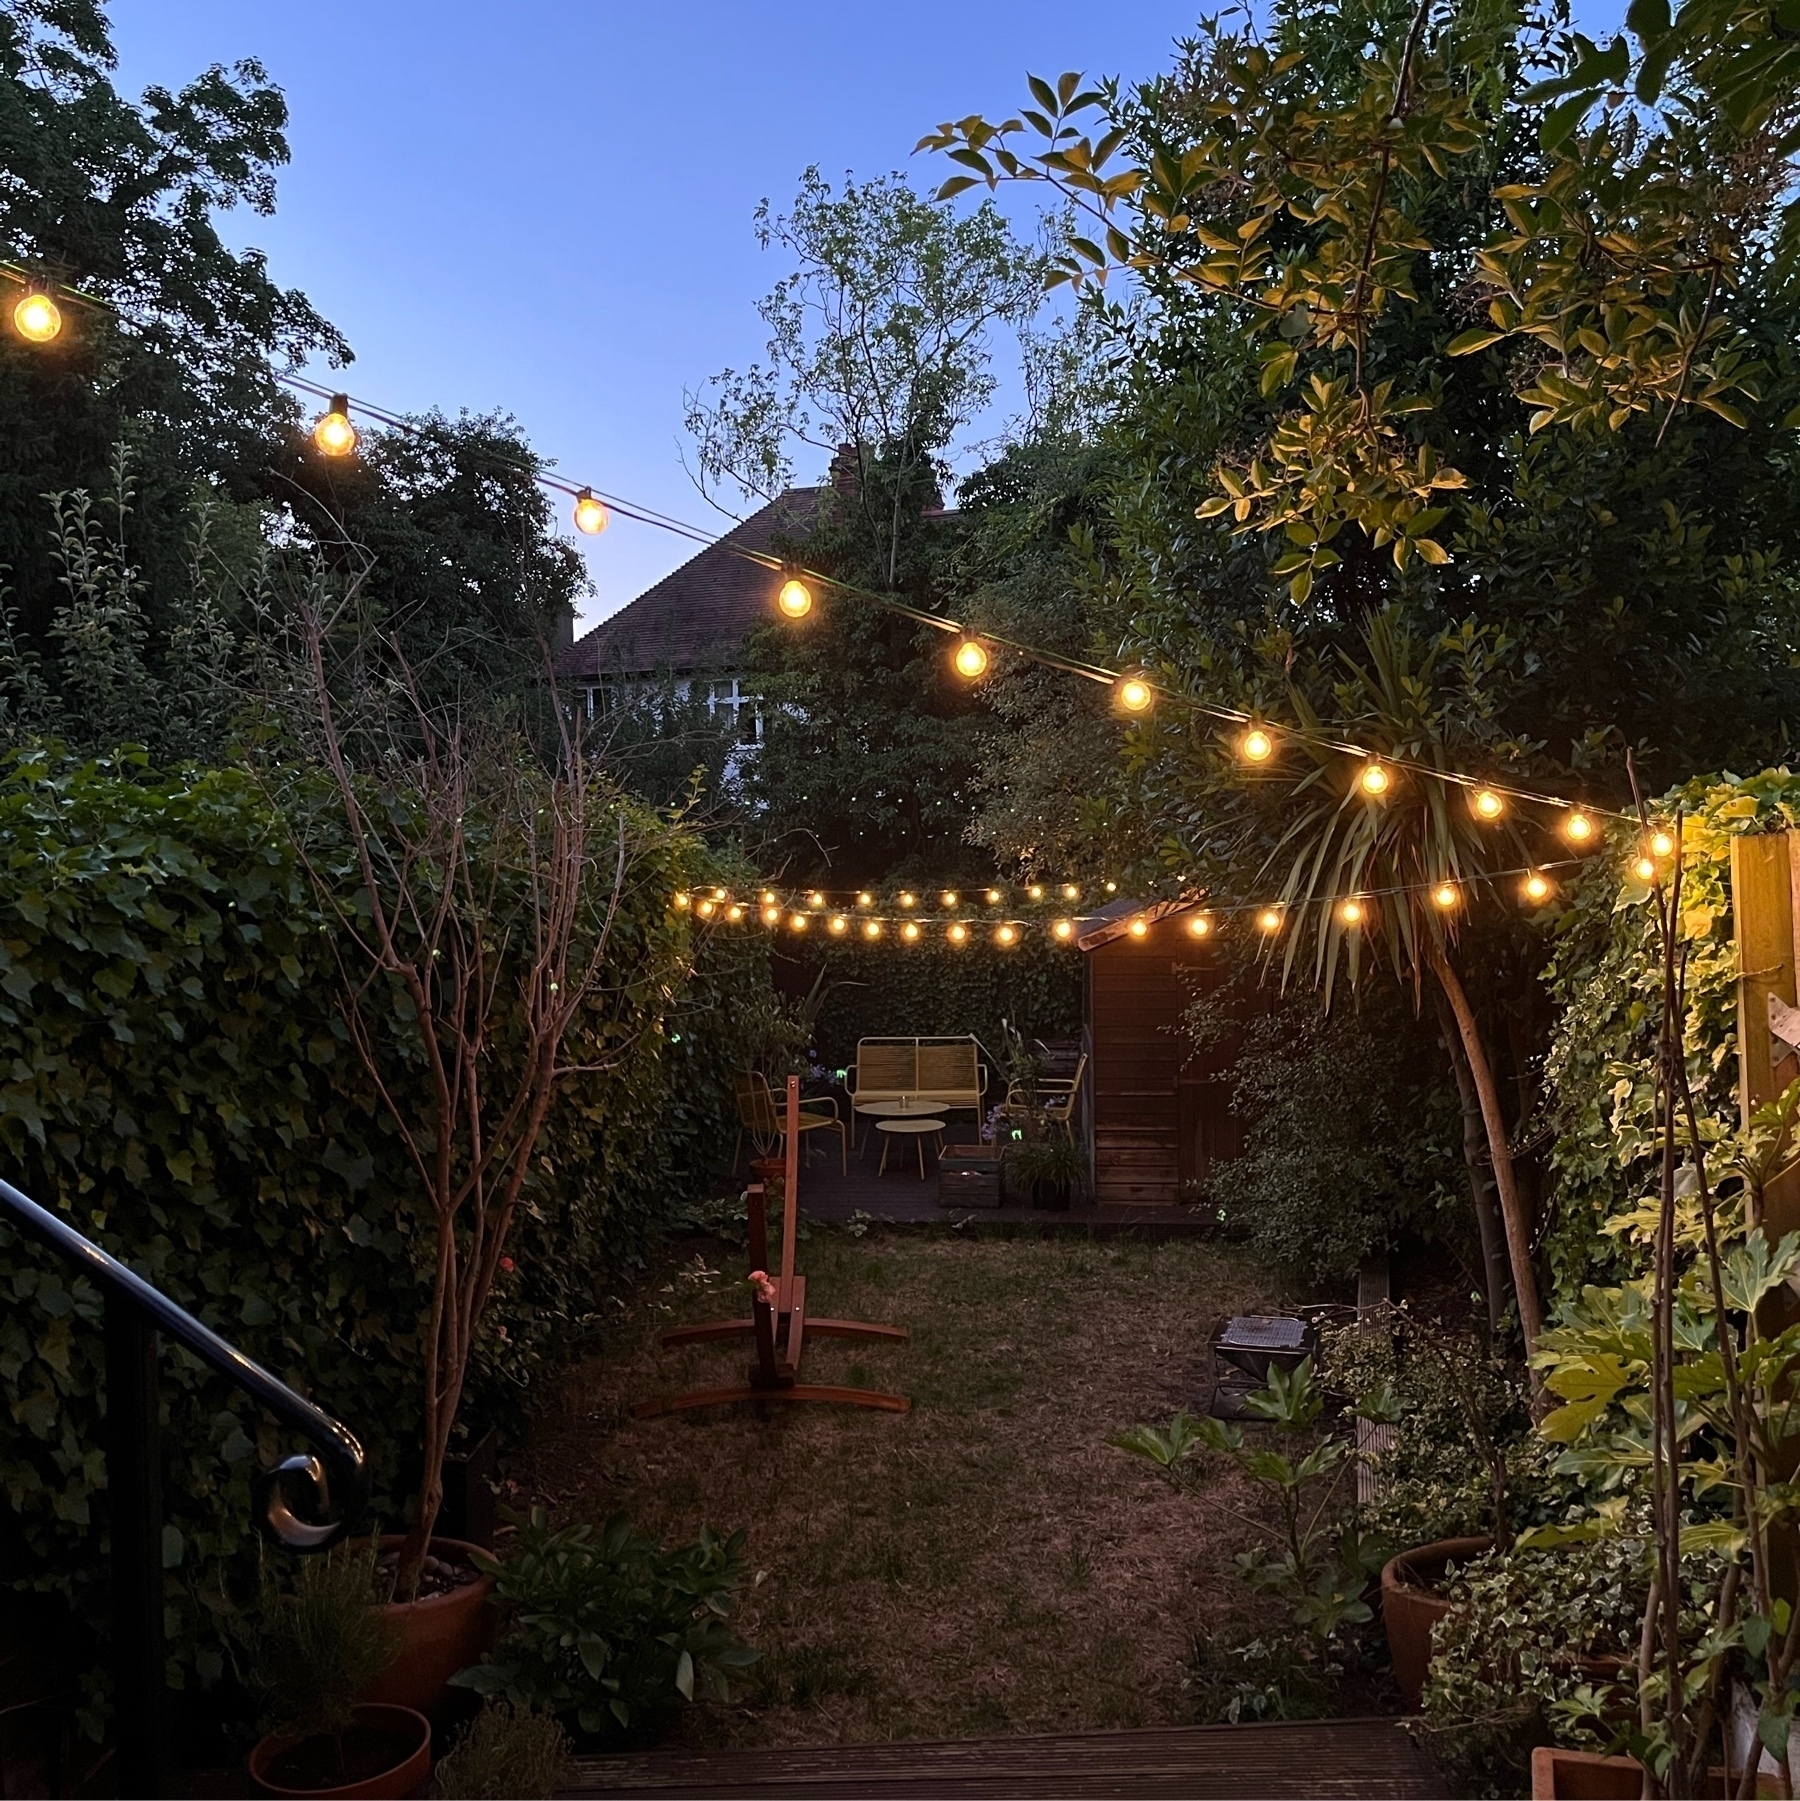 Garden with lights hanging on a zig zag with yellow garden furniture in the background.